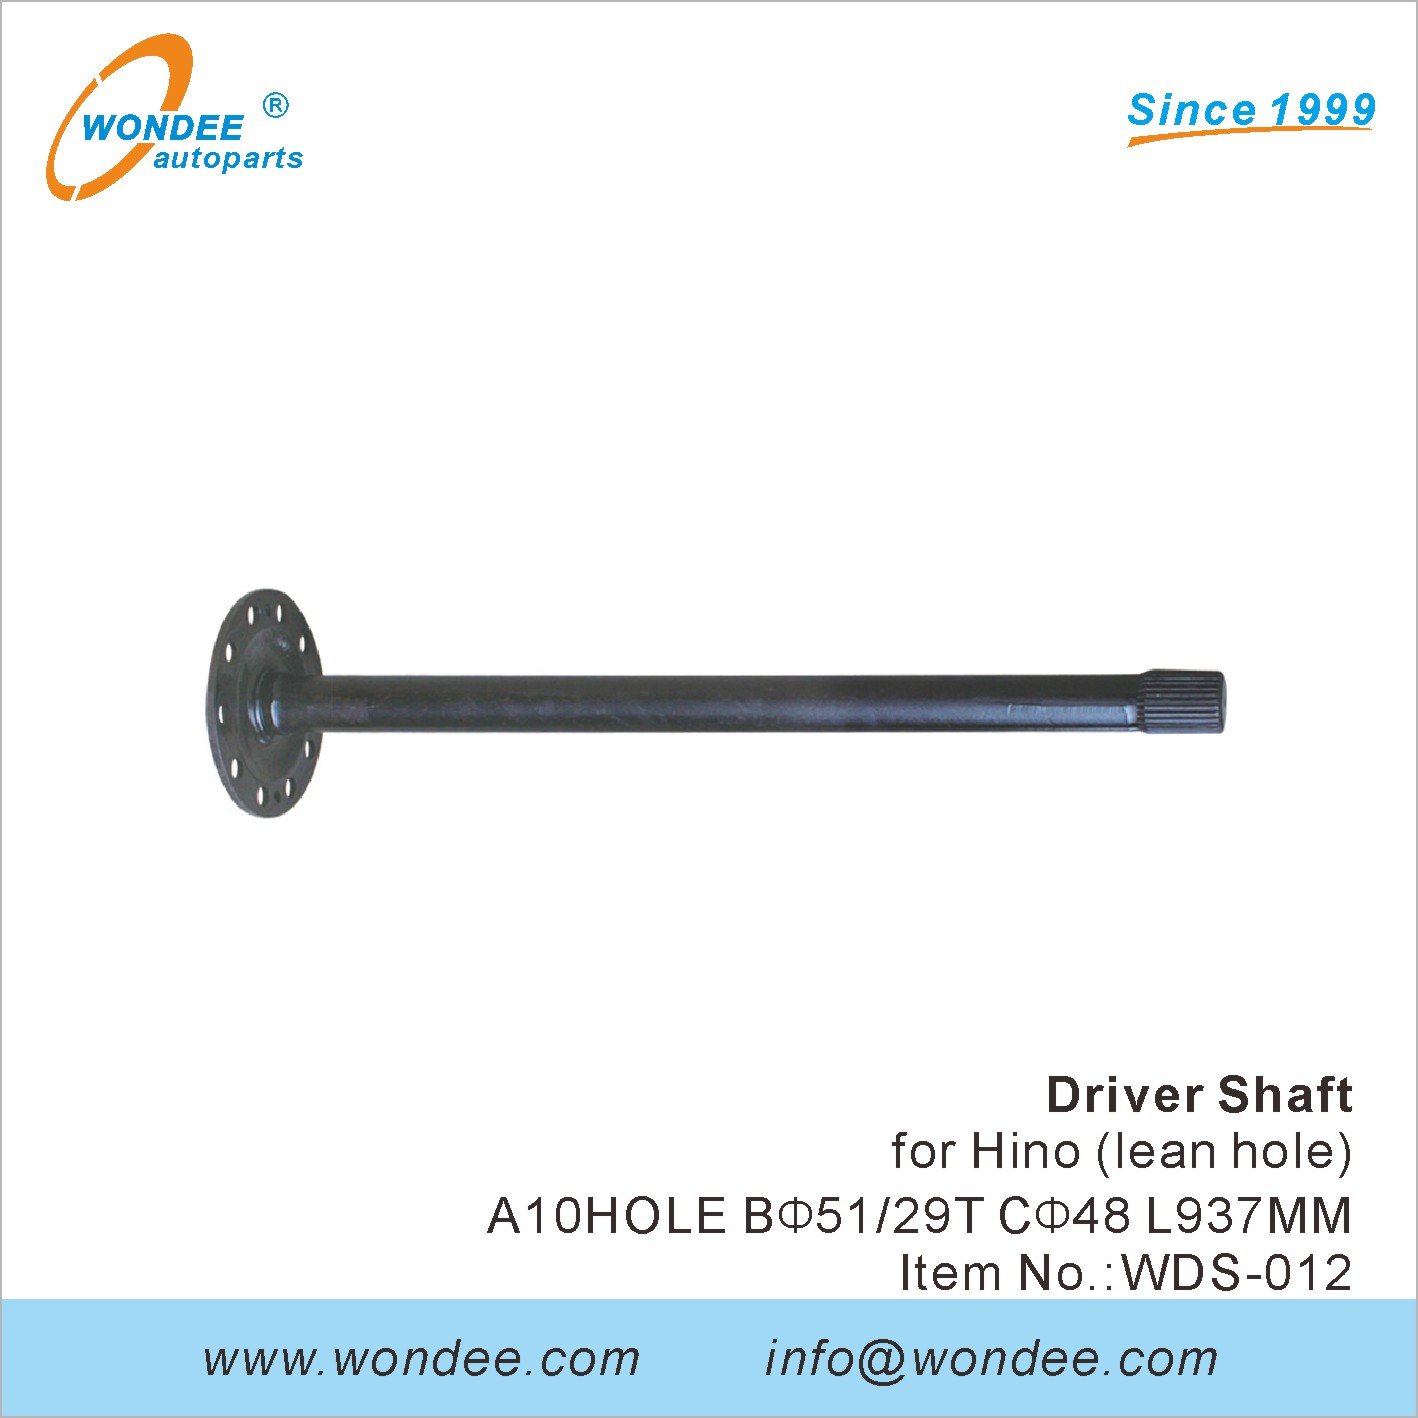 Driver Shaft and Axle Connection Shaft for Trucks